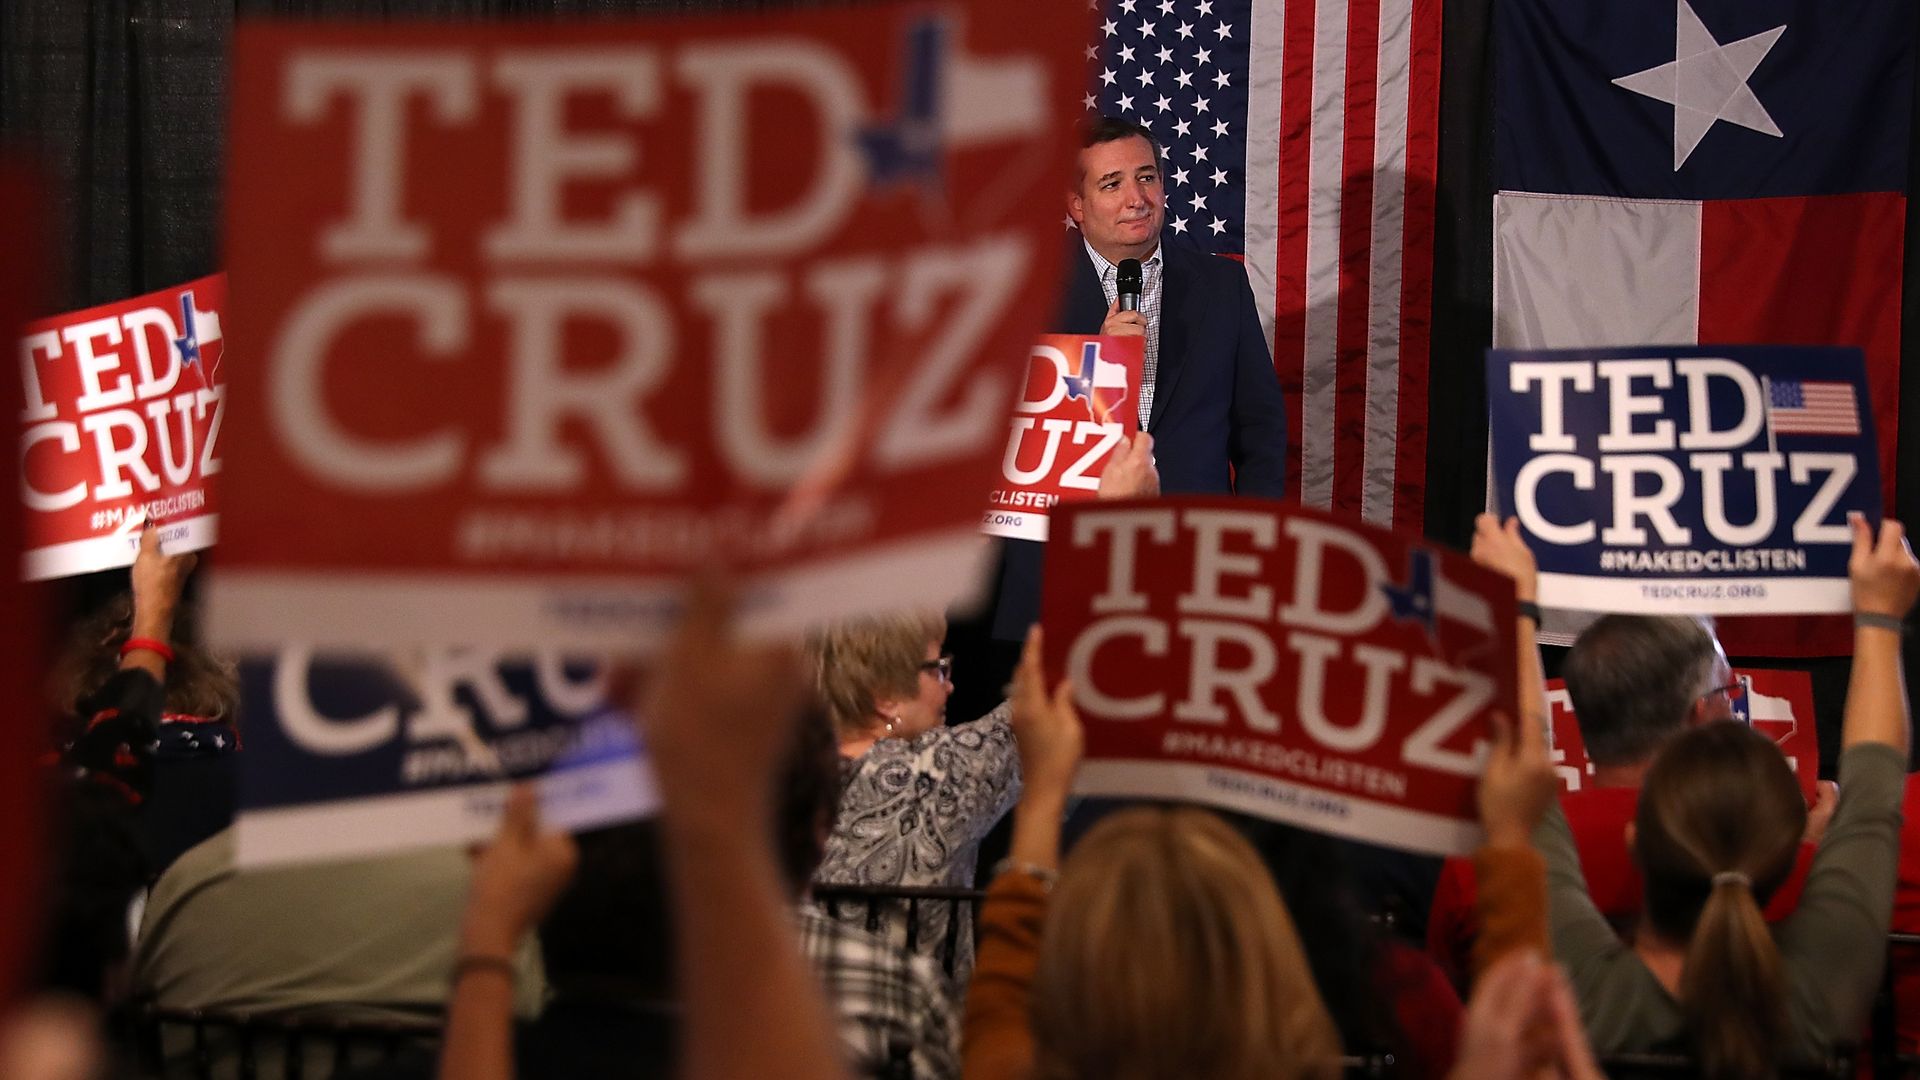 Ted Cruz standing on stage at a rally in Texas, with a bunch of people holding Ted Cruz signs